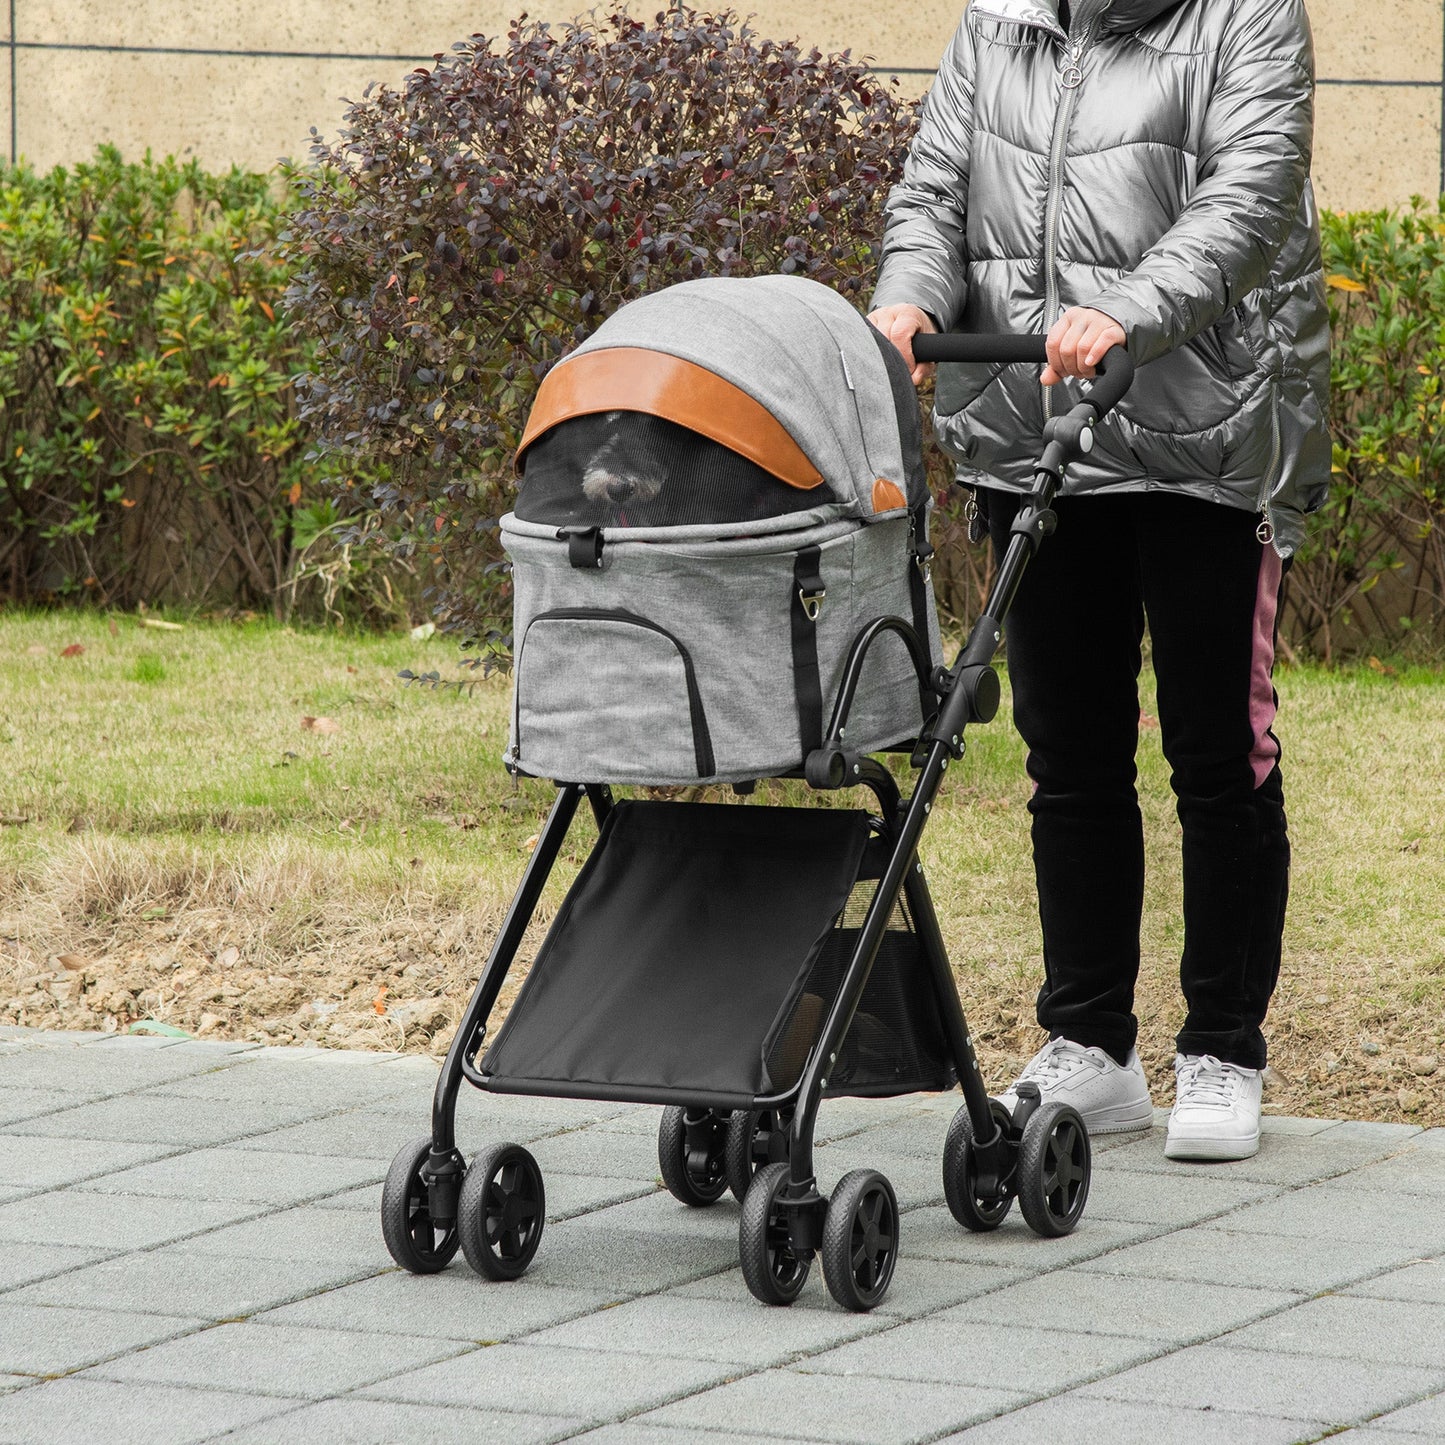 Pet Supplies-Luxury Folding Pet Stroller Dog/Cat Travel Carriage 2 In 1 Design Pet Carrier Bag + Stroller with Wheels and Adjustable Canopy - Grey - Outdoor Style Company